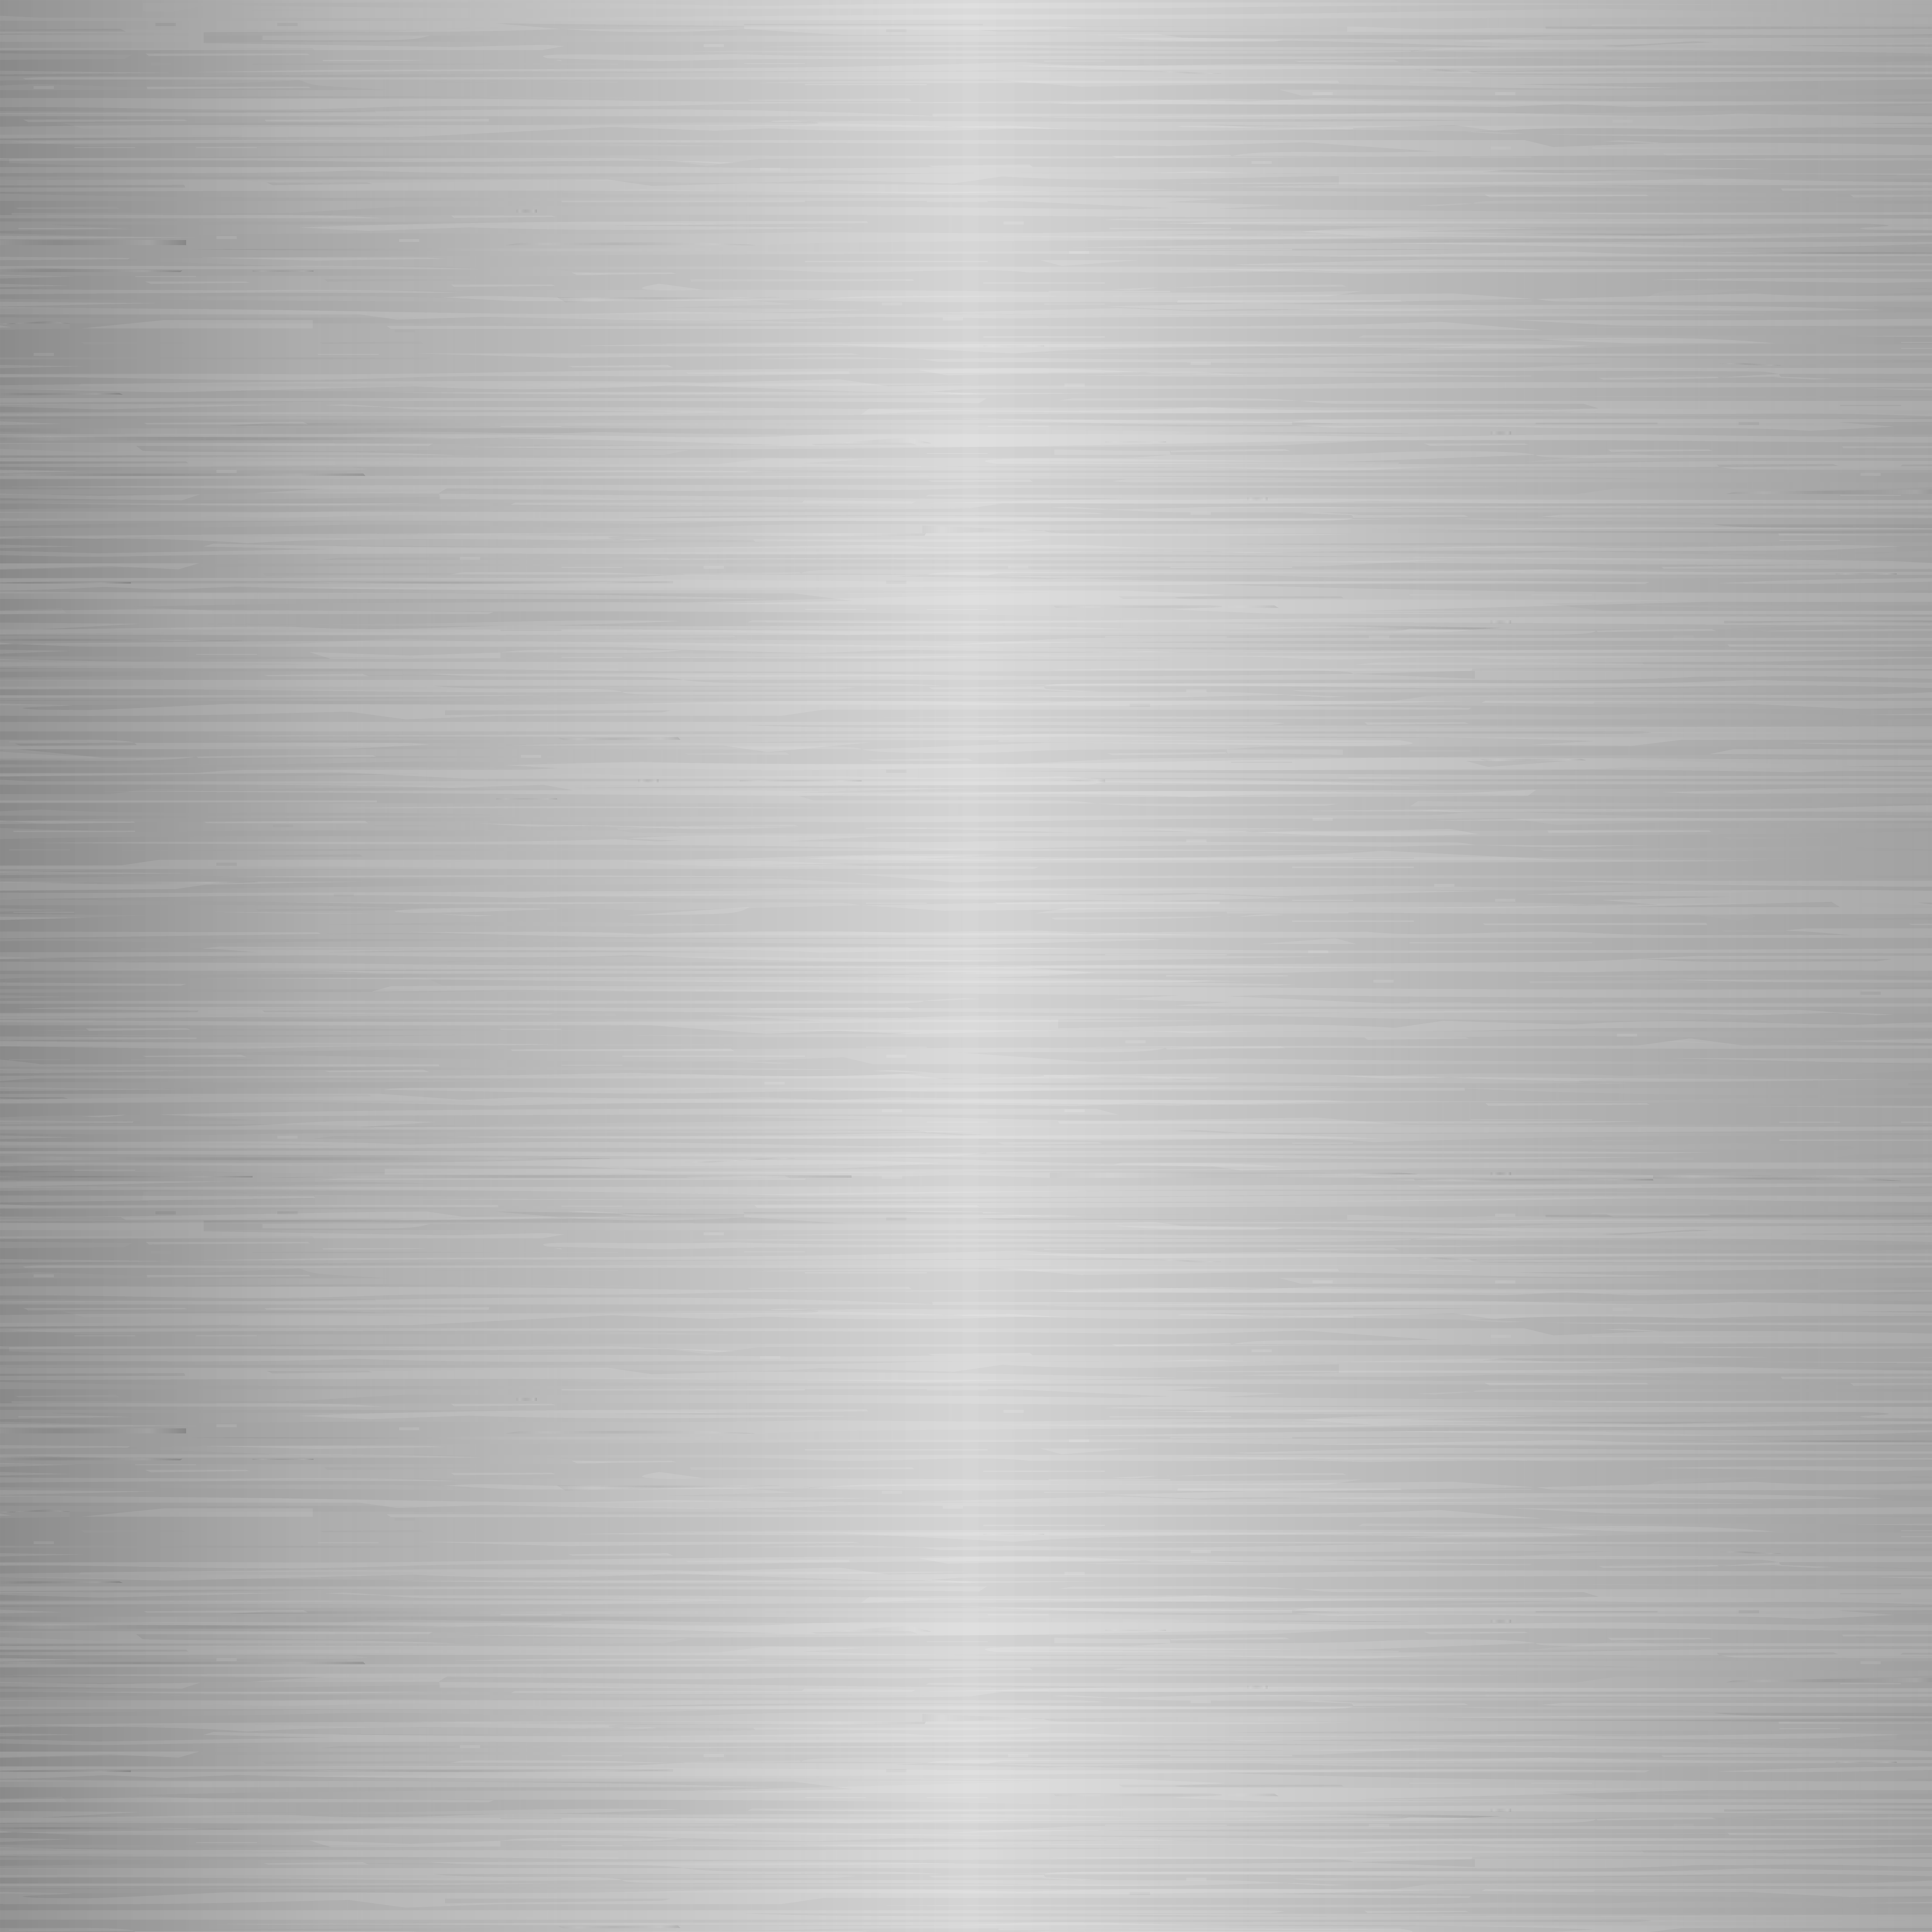 Silver Background png download - 700*1050 - Free Transparent